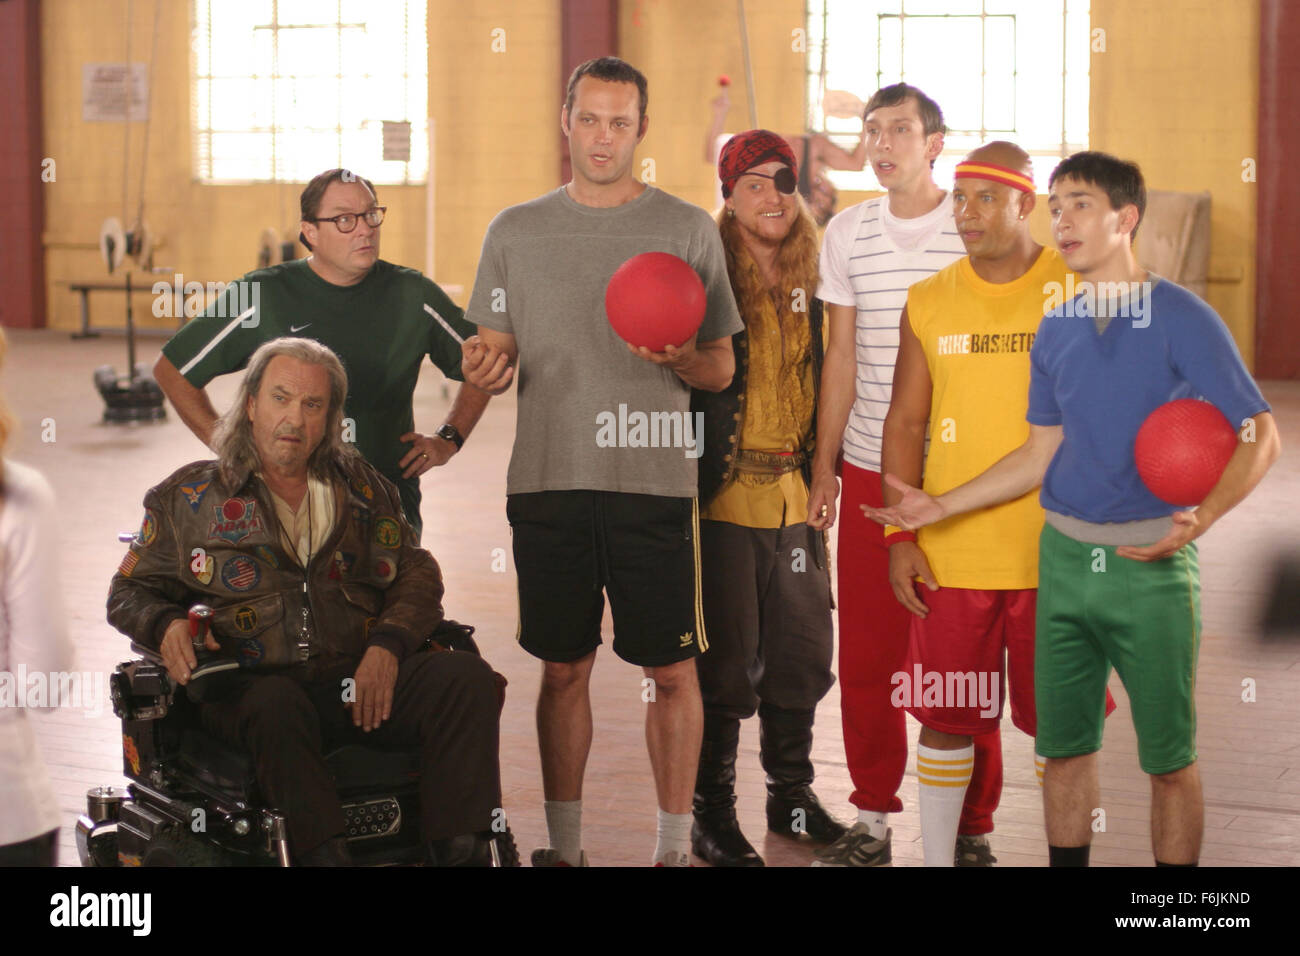 Jul 01, 2004; Hollywood, CA, USA; Directed by Rawson Marshall Thurber, 'Dodgeball: A True Underdog Story' stars RIP TORN as Patches O'Houlihan, STEPHEN ROOT as Gordon, VINCE VAUGHN as Peter La Fleur, ALAN TUDYK as Steve the Pirate, JOEL MOORE as Owen, CHRIS WILLIAMS as Dwight, and JUSTIN LONG as Justin,  battling to save their gym with an intense game of dodgeball. Stock Photo